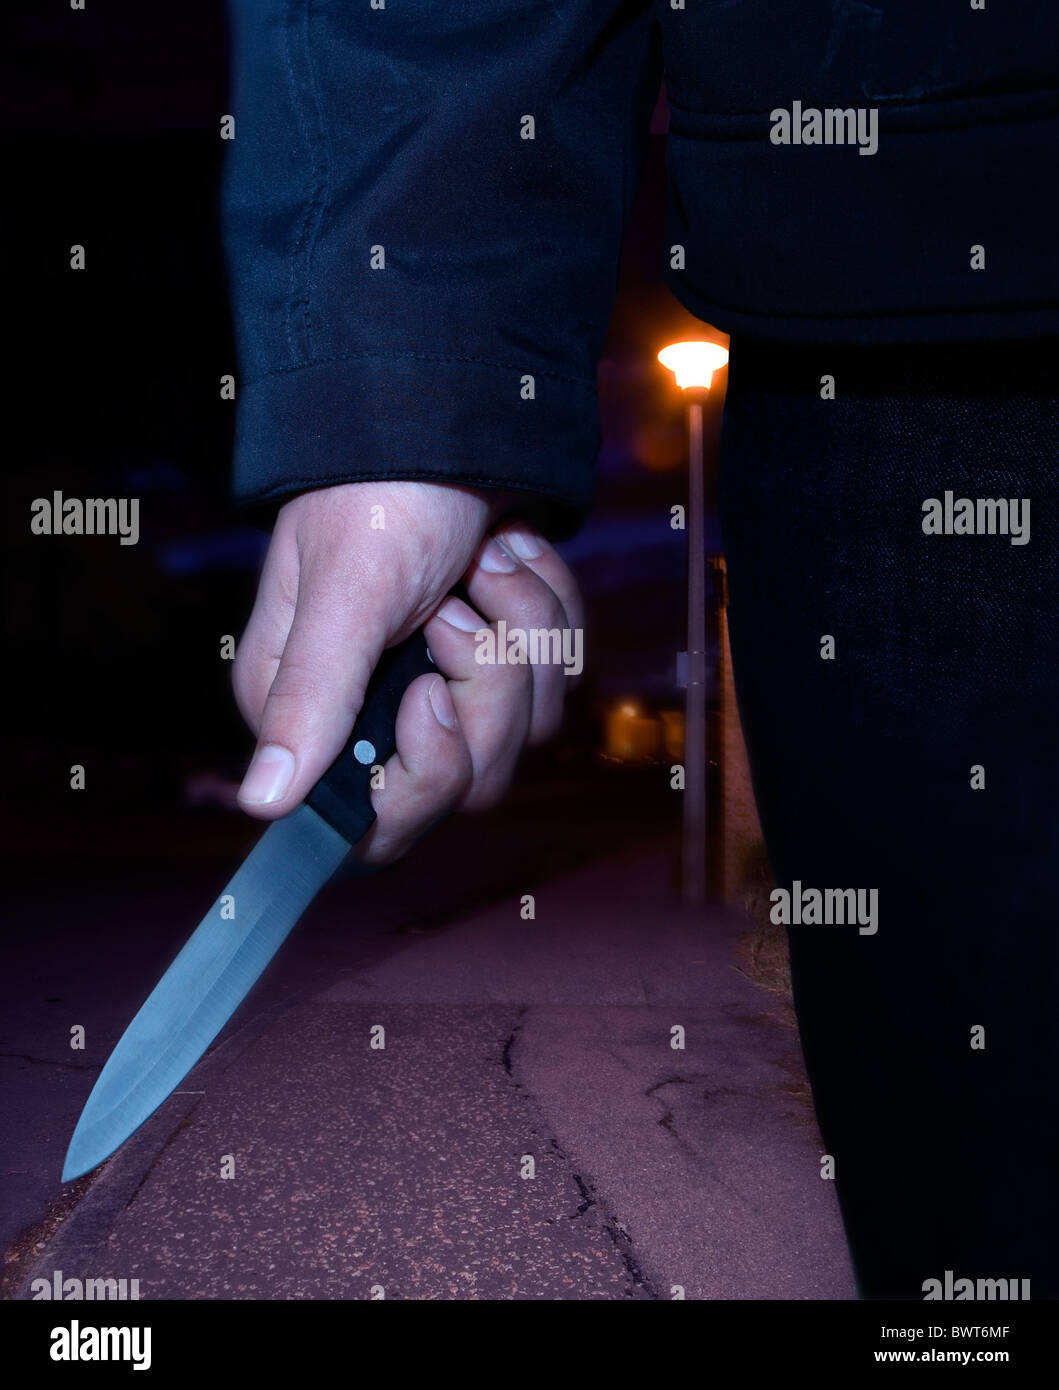 Close up of a male hand carrying a knife at night Stock Photo